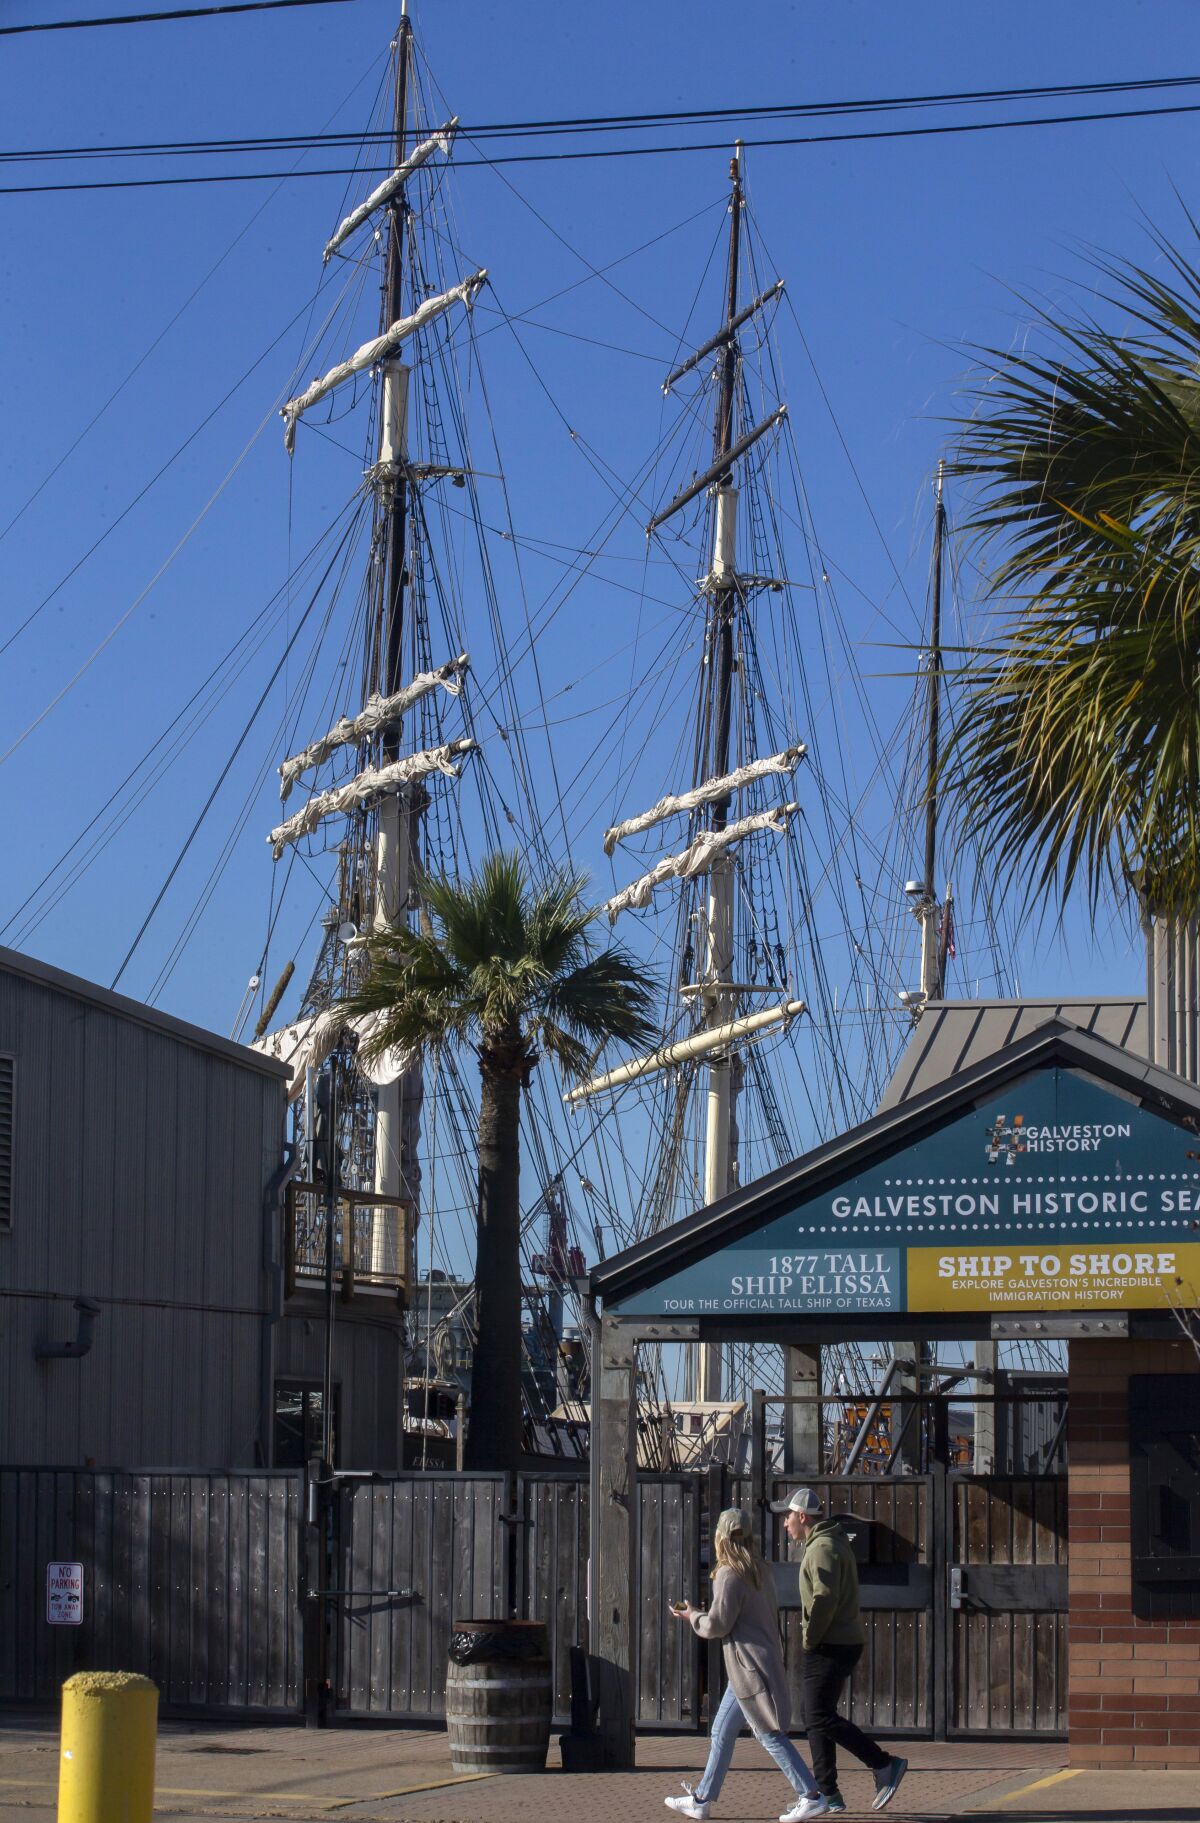 The masts of the 1877 tall ship Elissa rise behind the gates of the Galveston Historic Seaport on Saturday, Feb. 5, 2022. A woman fell to her death from a mast on the historic ship that's featured at a museum after her safety harness somehow came unclipped, police said. (Stuart Villanueva/The Galveston County Daily News via AP)